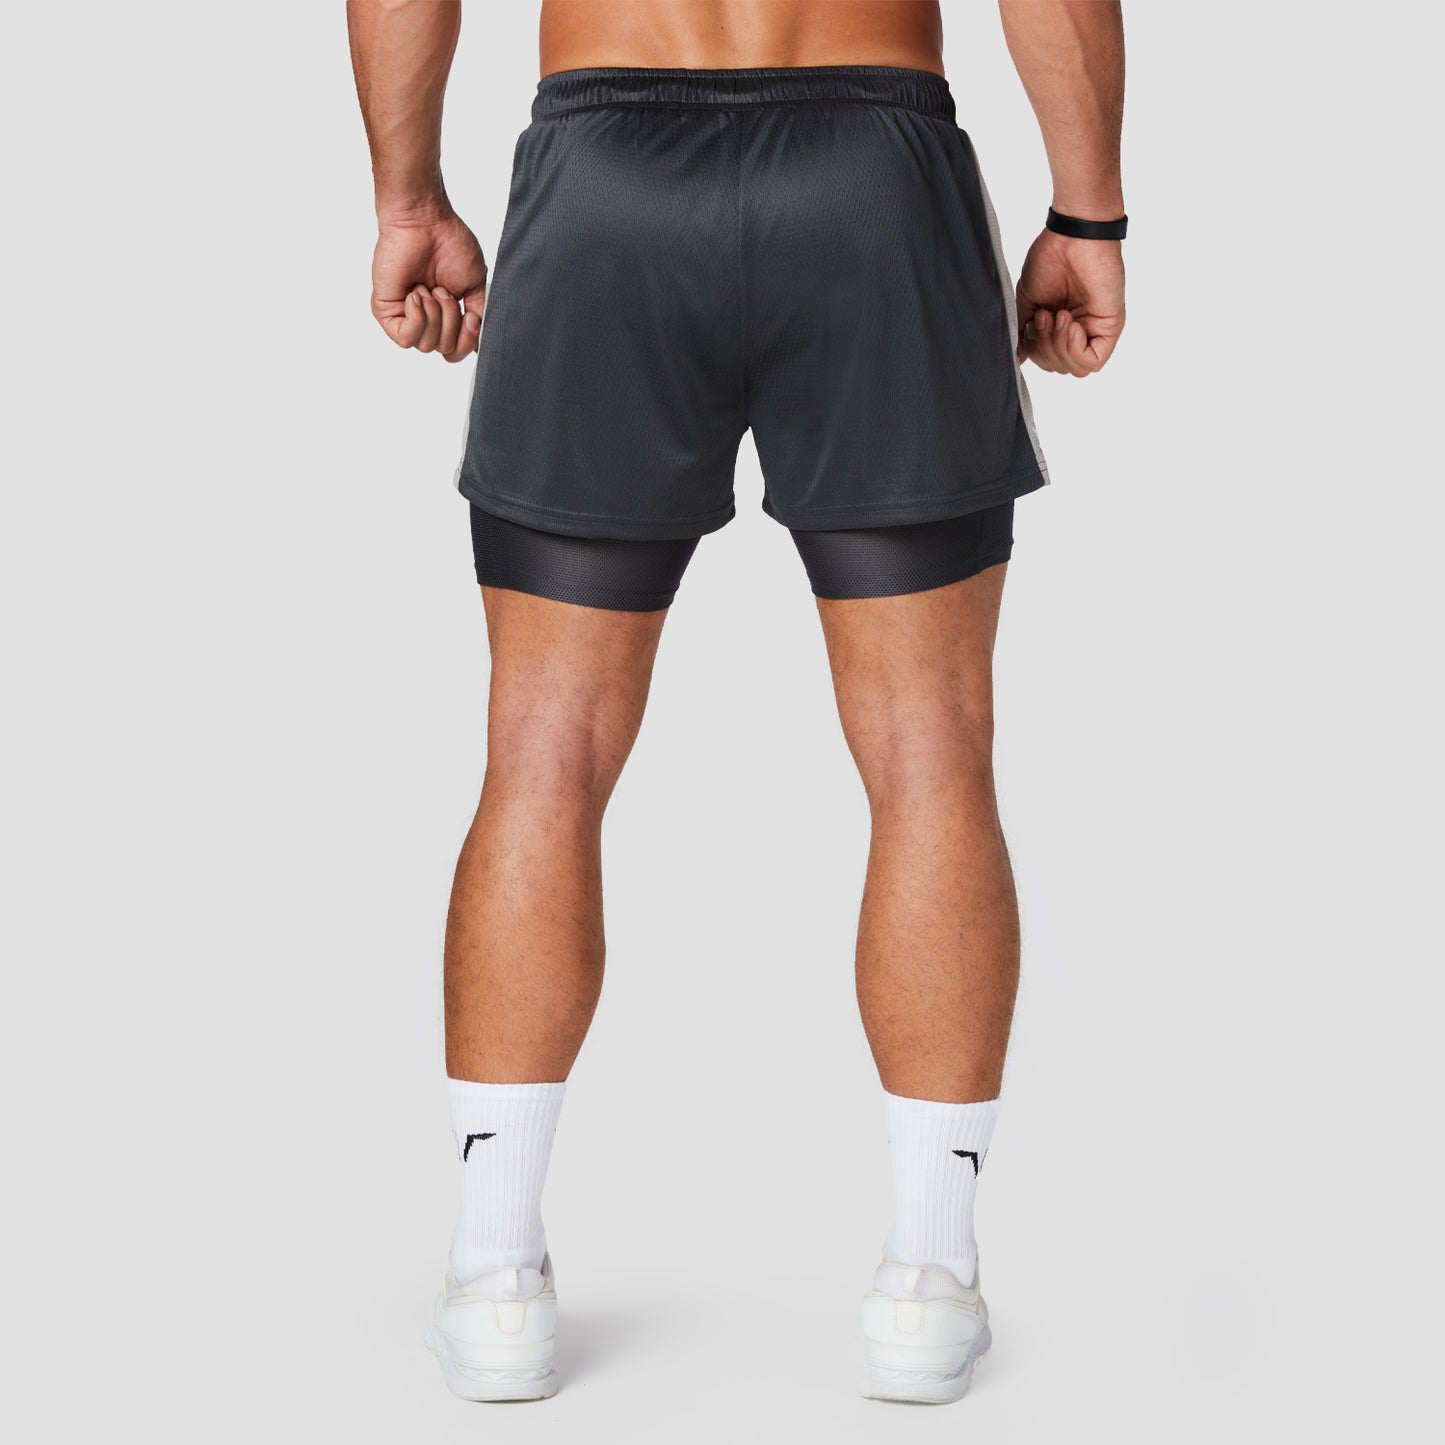 squatwolf-gym-wear-hybrid-performance-2-in-1-shorts-charcoal-workout-shorts-for-men